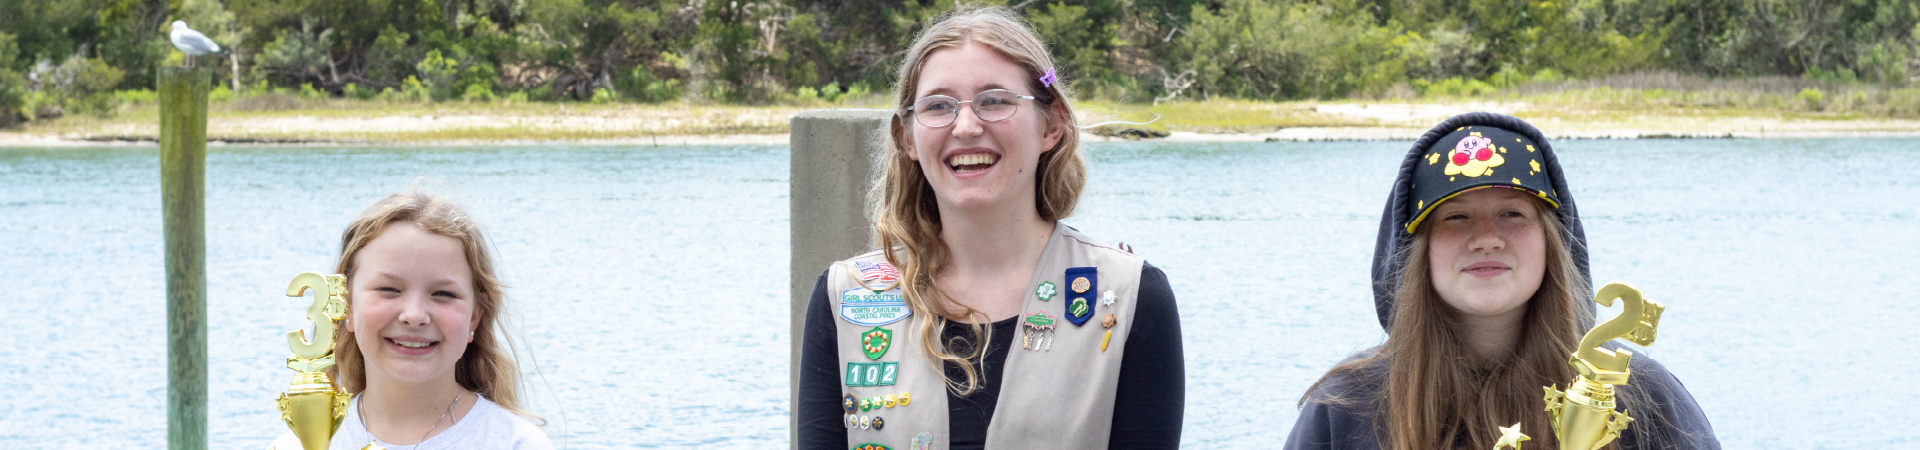  three girl scouts holding awards celebrate in front of lake 